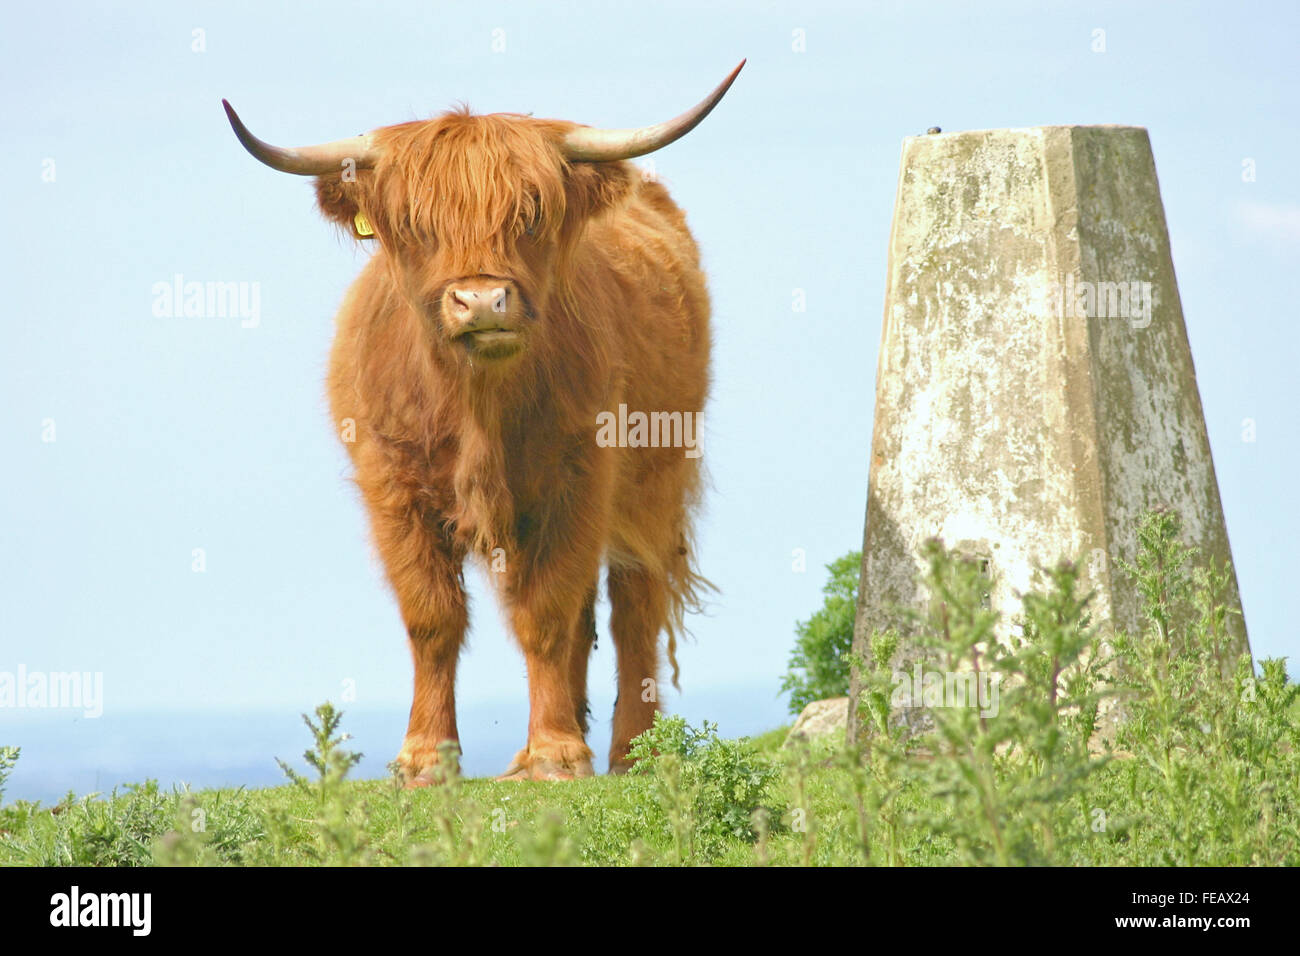 A long horned cow Stock Photo